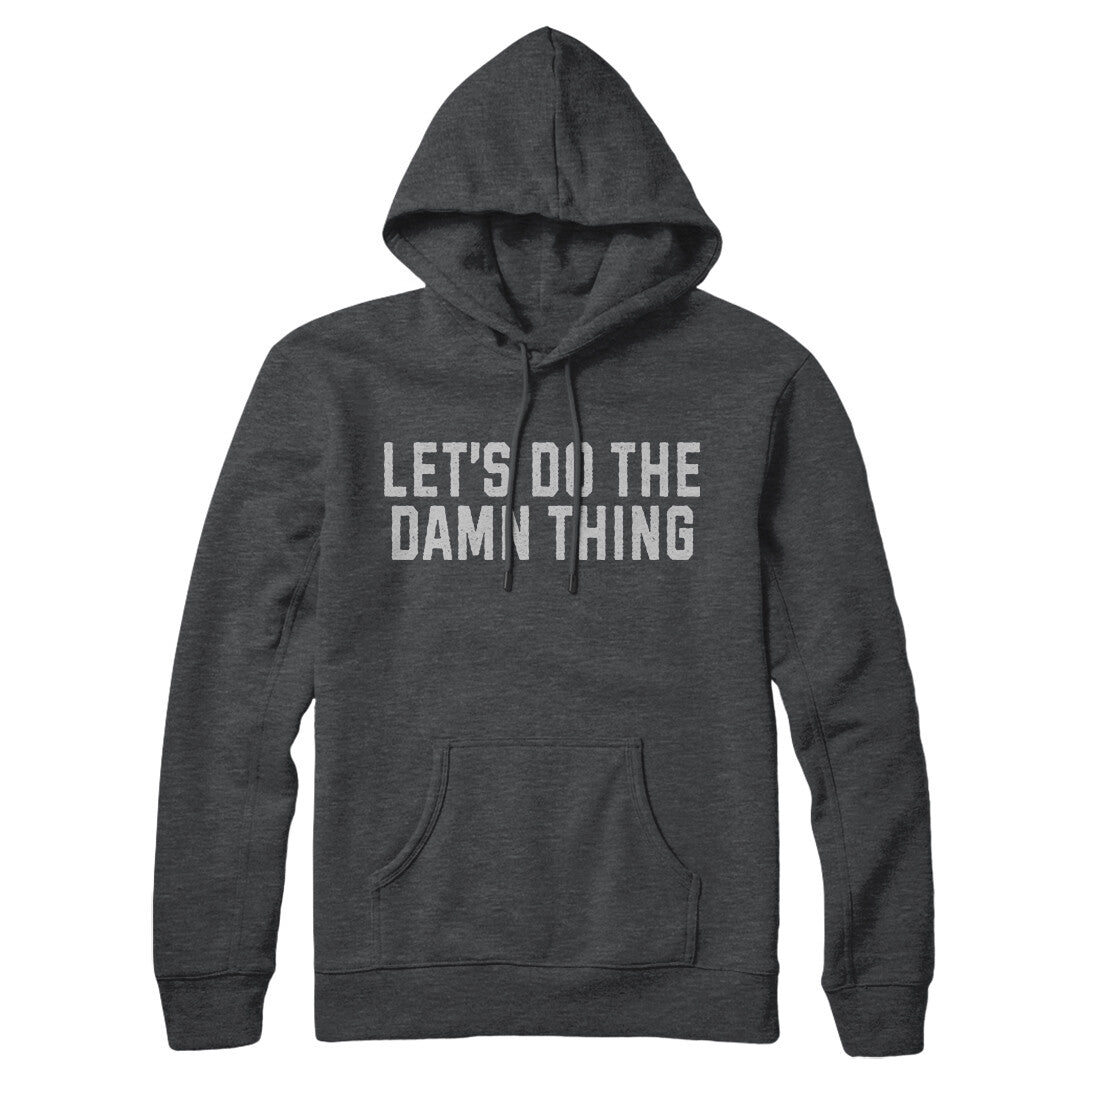 Let’s Do the Damn Thing in Charcoal Heather Color